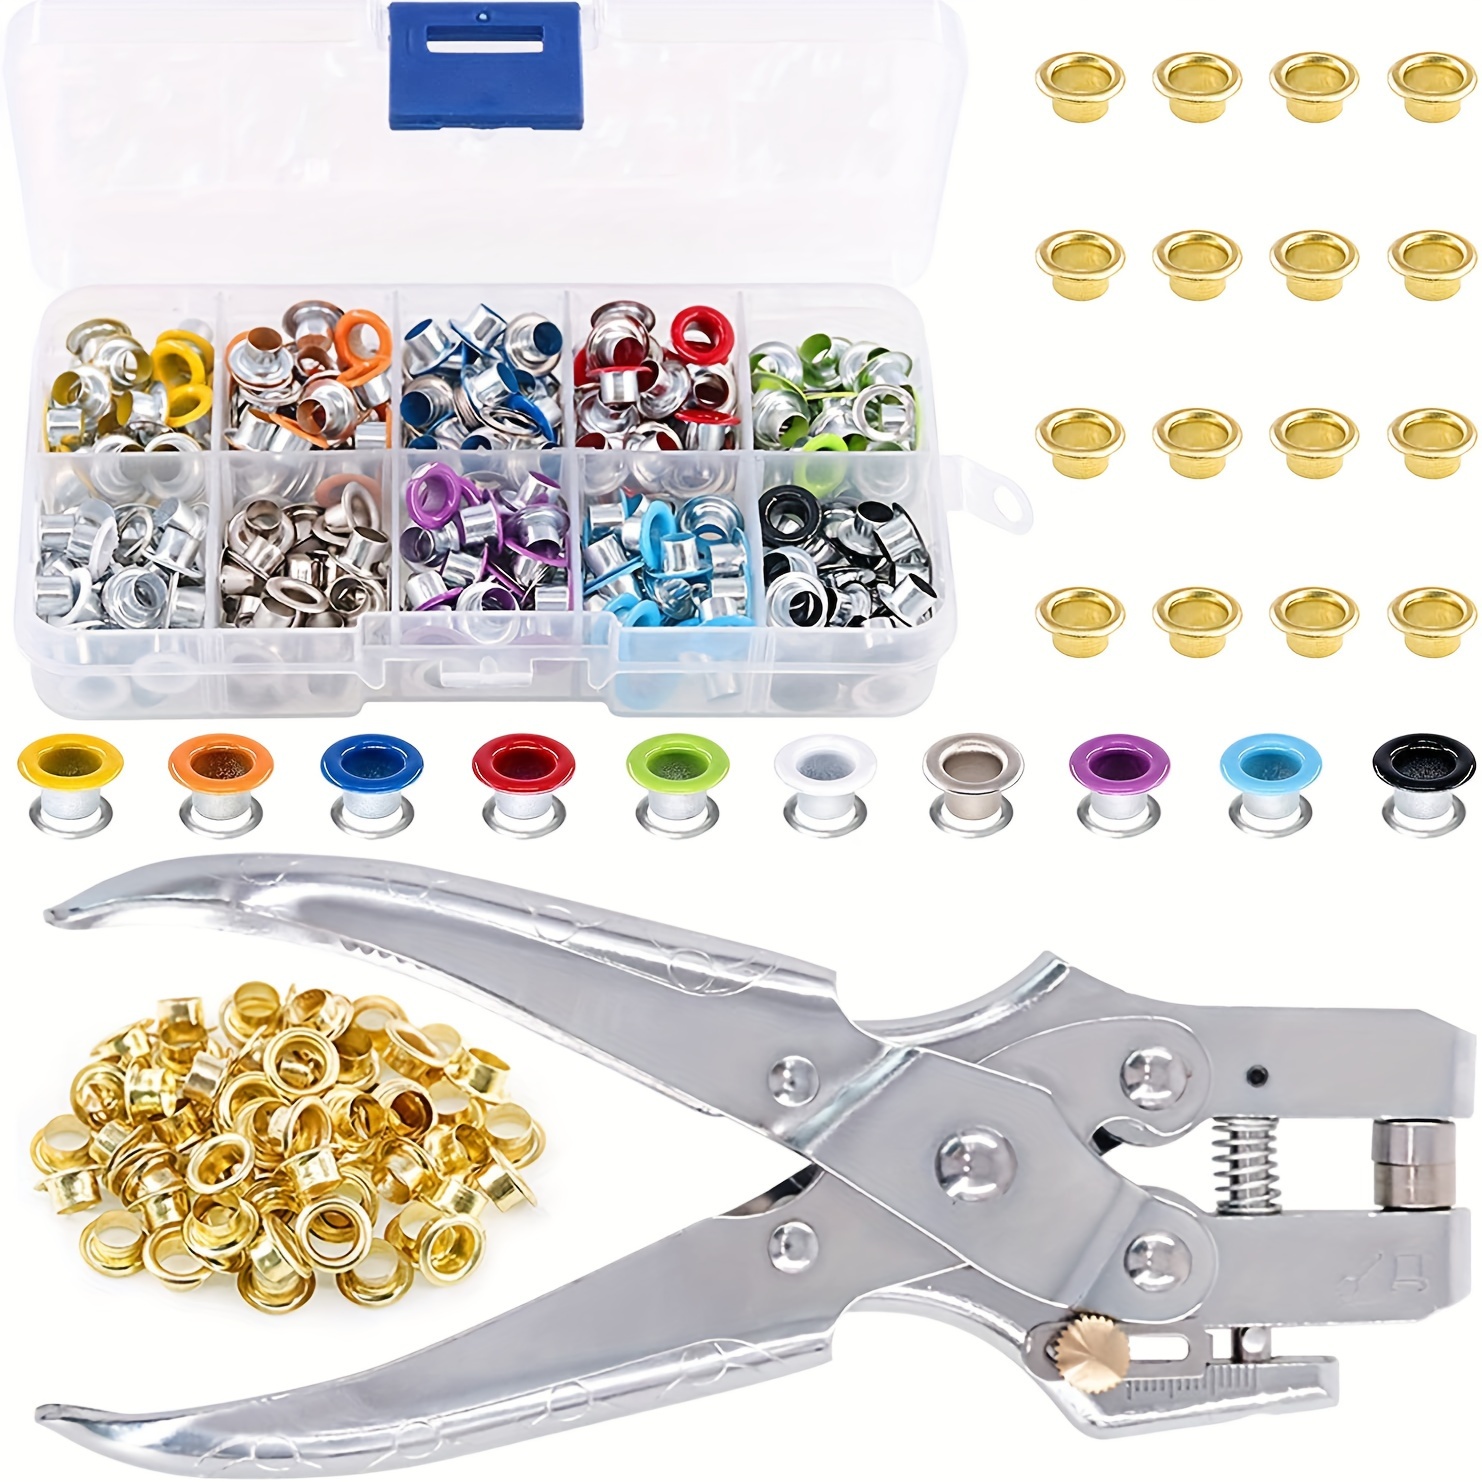 Pangda Grommet Tool Kit Grommet Setting Tool and 100 Sets Grommets Eyelets with Storage Box (1/2 inch Inside Diameter)